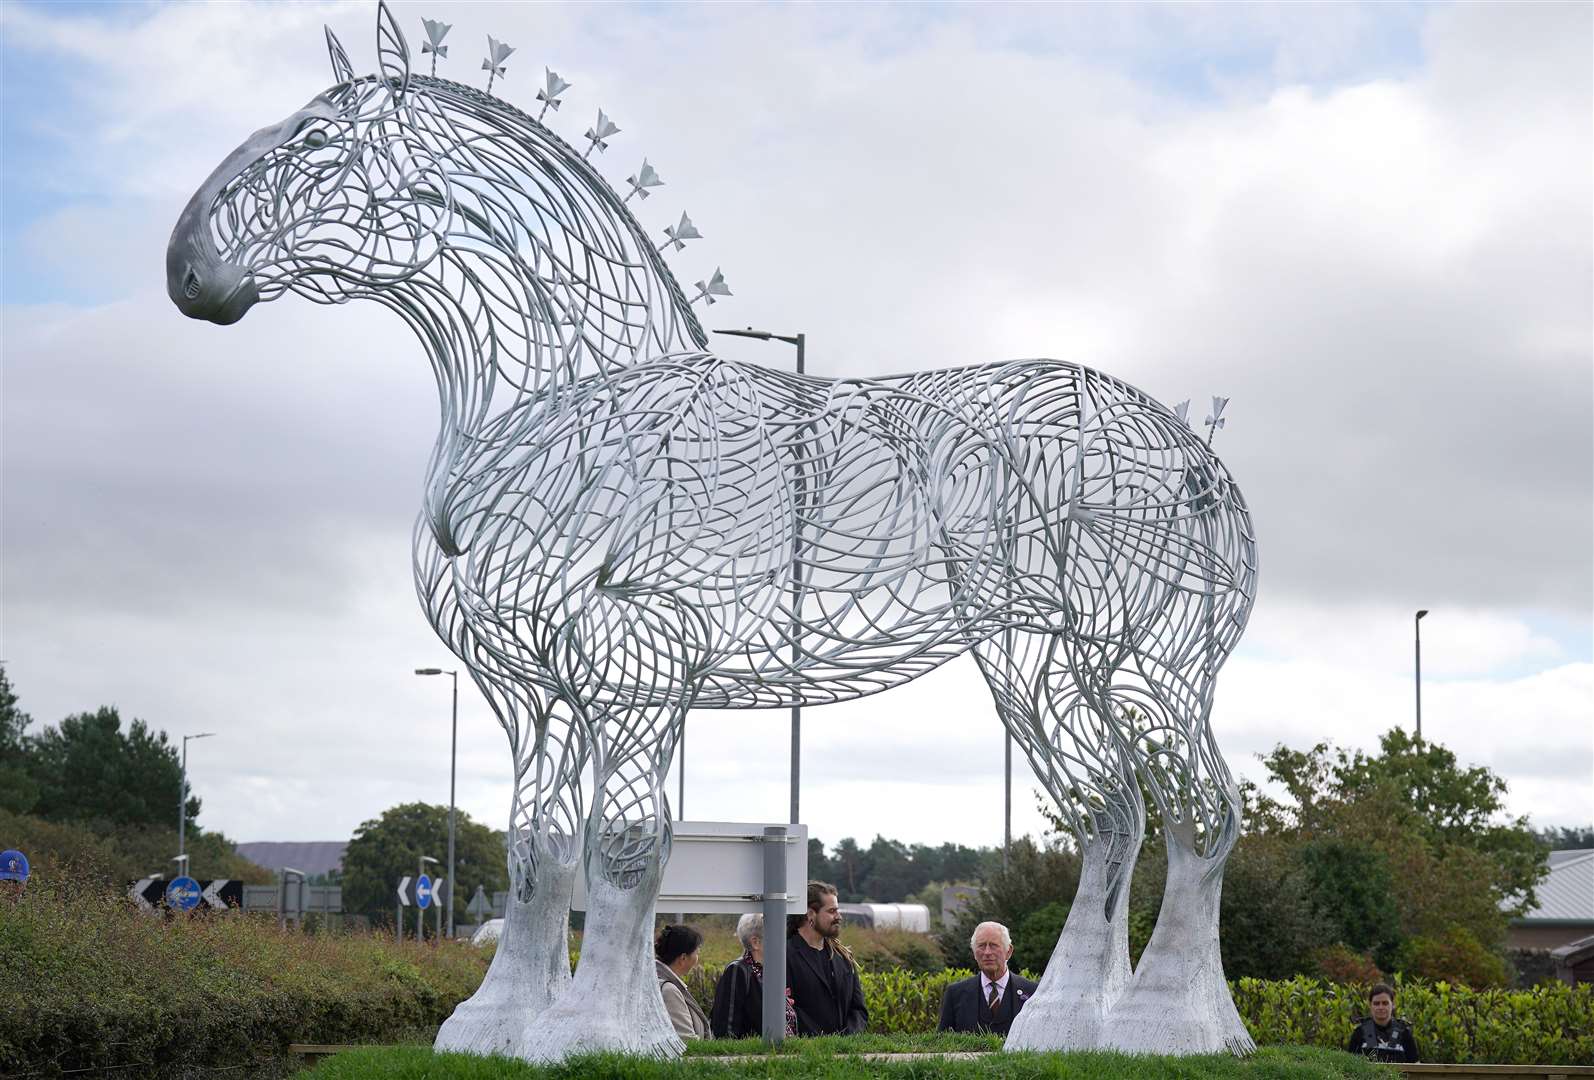 The Prince of Wales viewing a statue of a Clydesdale horse situated by Lanark Auction Market (Andrew Milligan/PA)